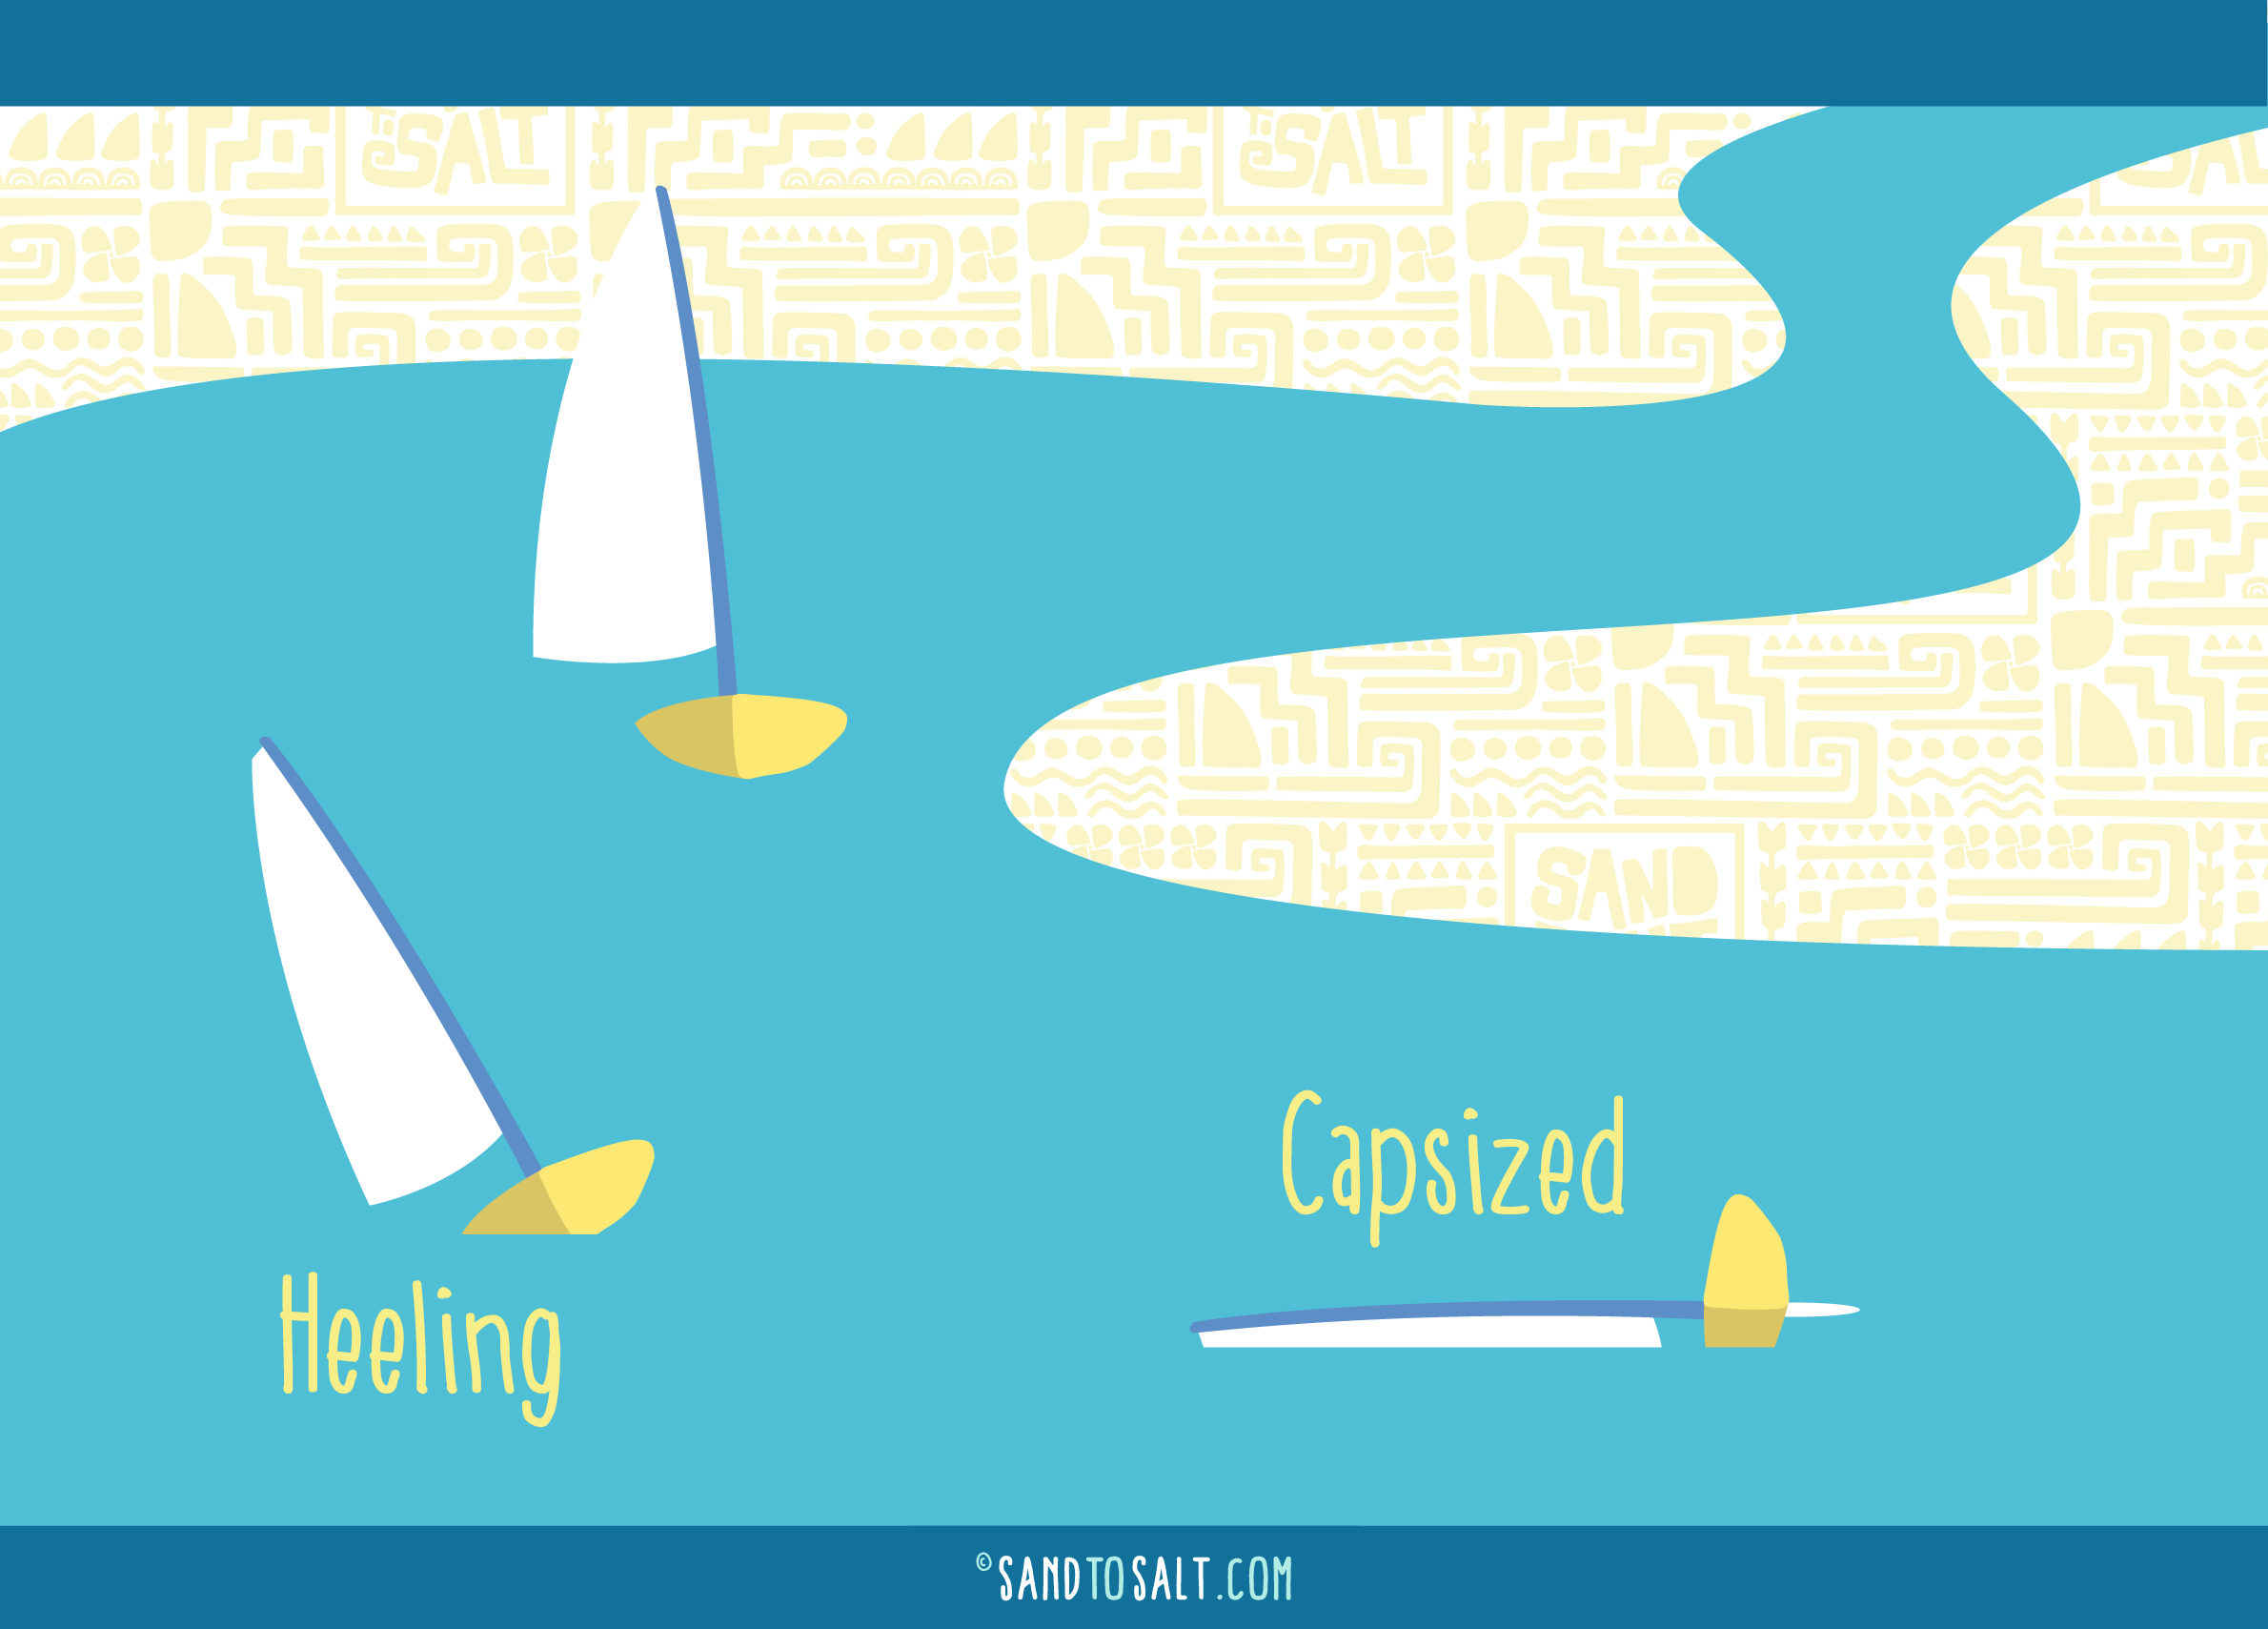 Sailing Boats Capsized and Heeling: Diagram of a sailing boat in the capsized and heeling positions taken from the Sailing Glossary Poster at Sandtosalt.com